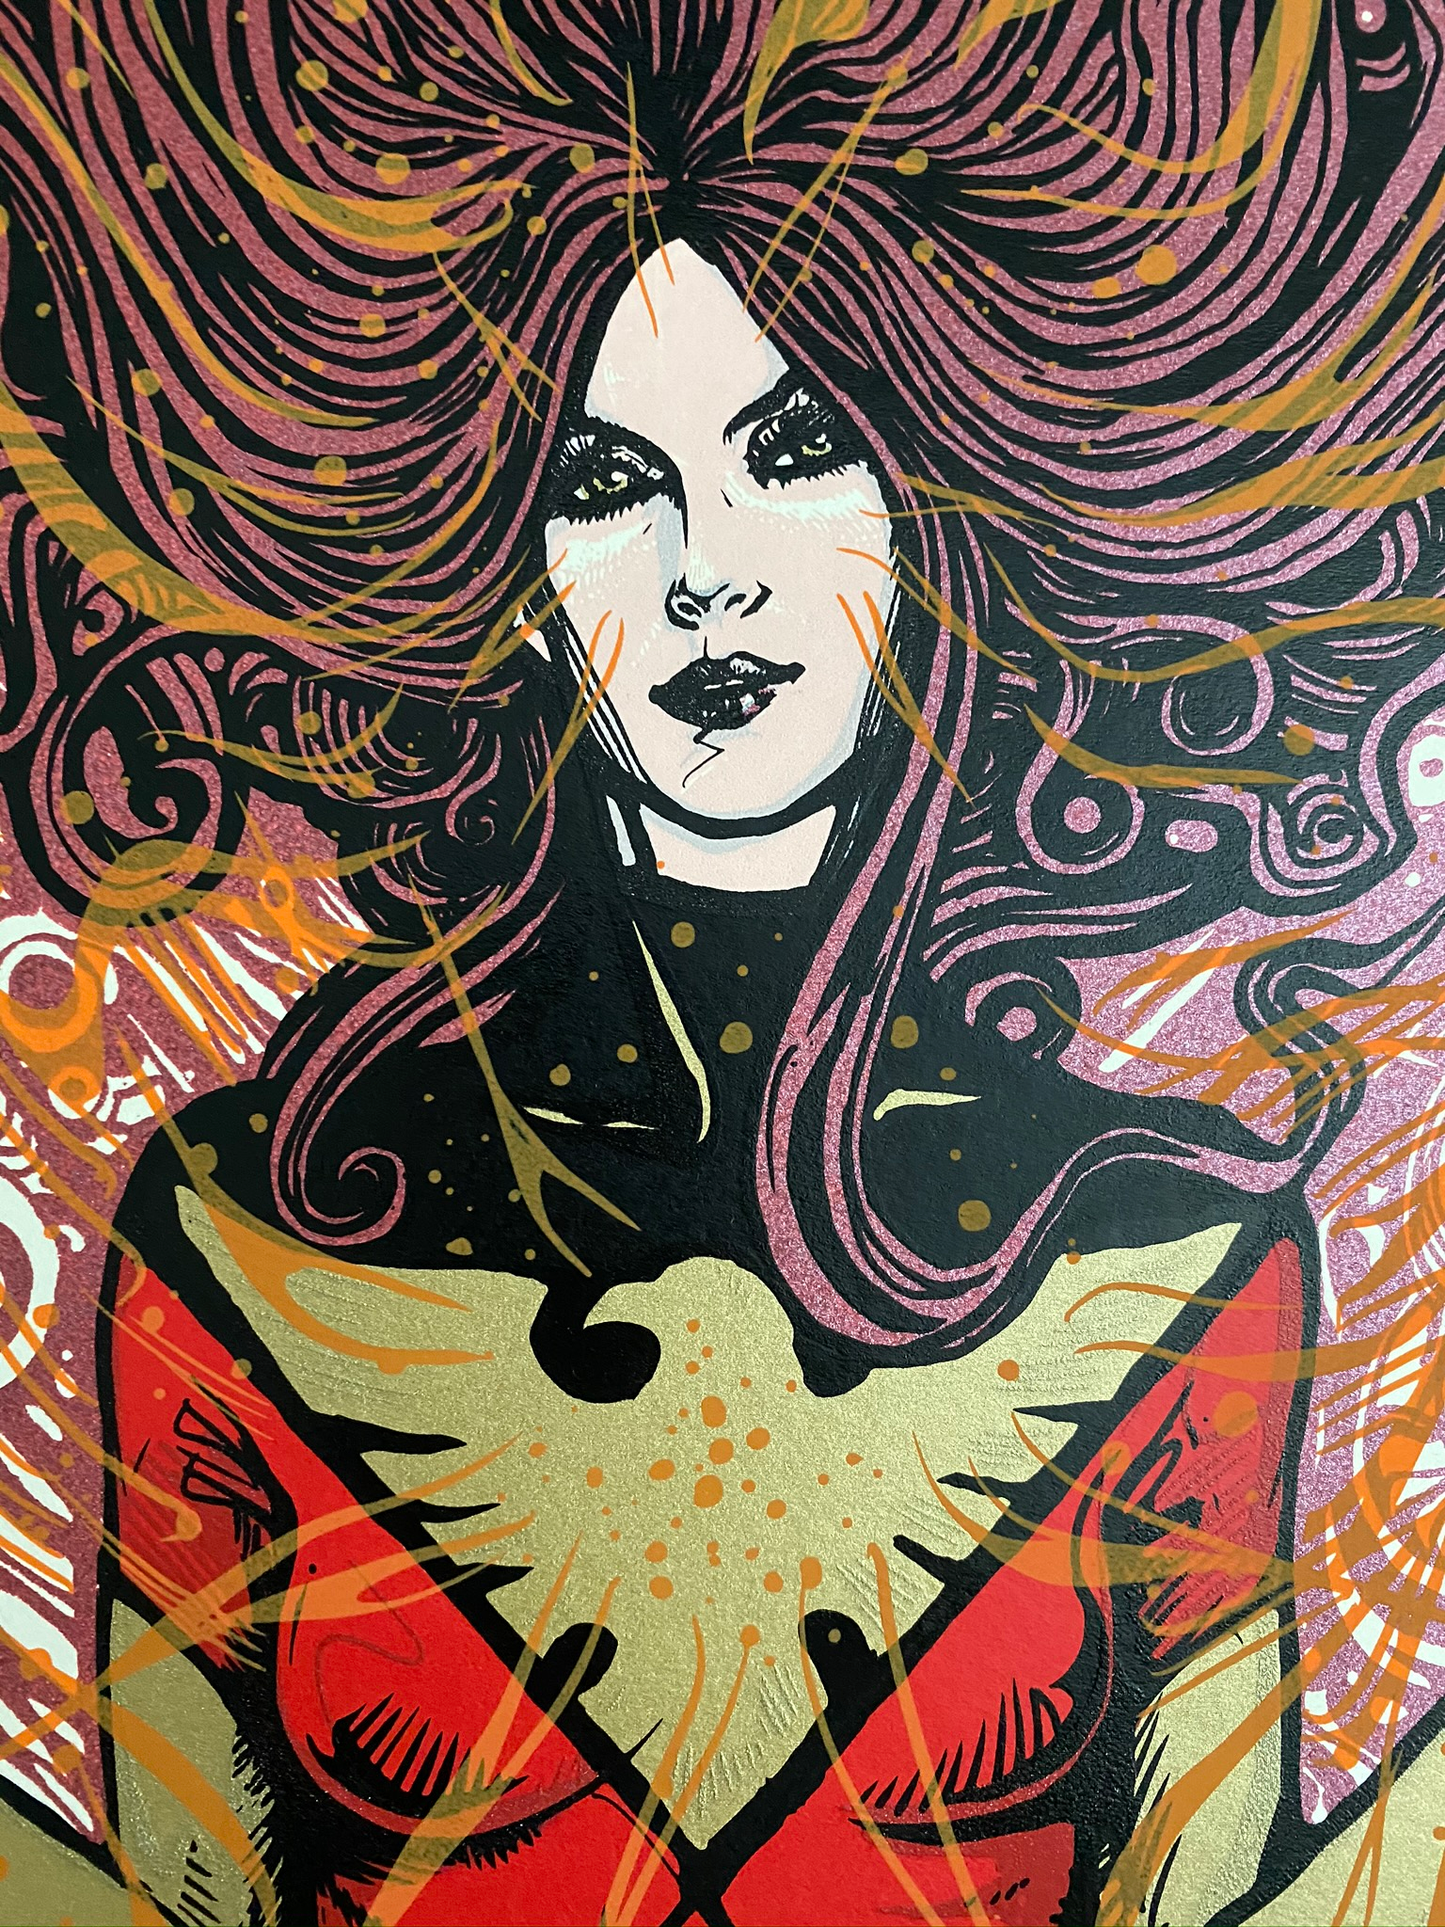 Details for Marvel's Dark Phoenix by Malleus. Limited-edition screenprint poster.